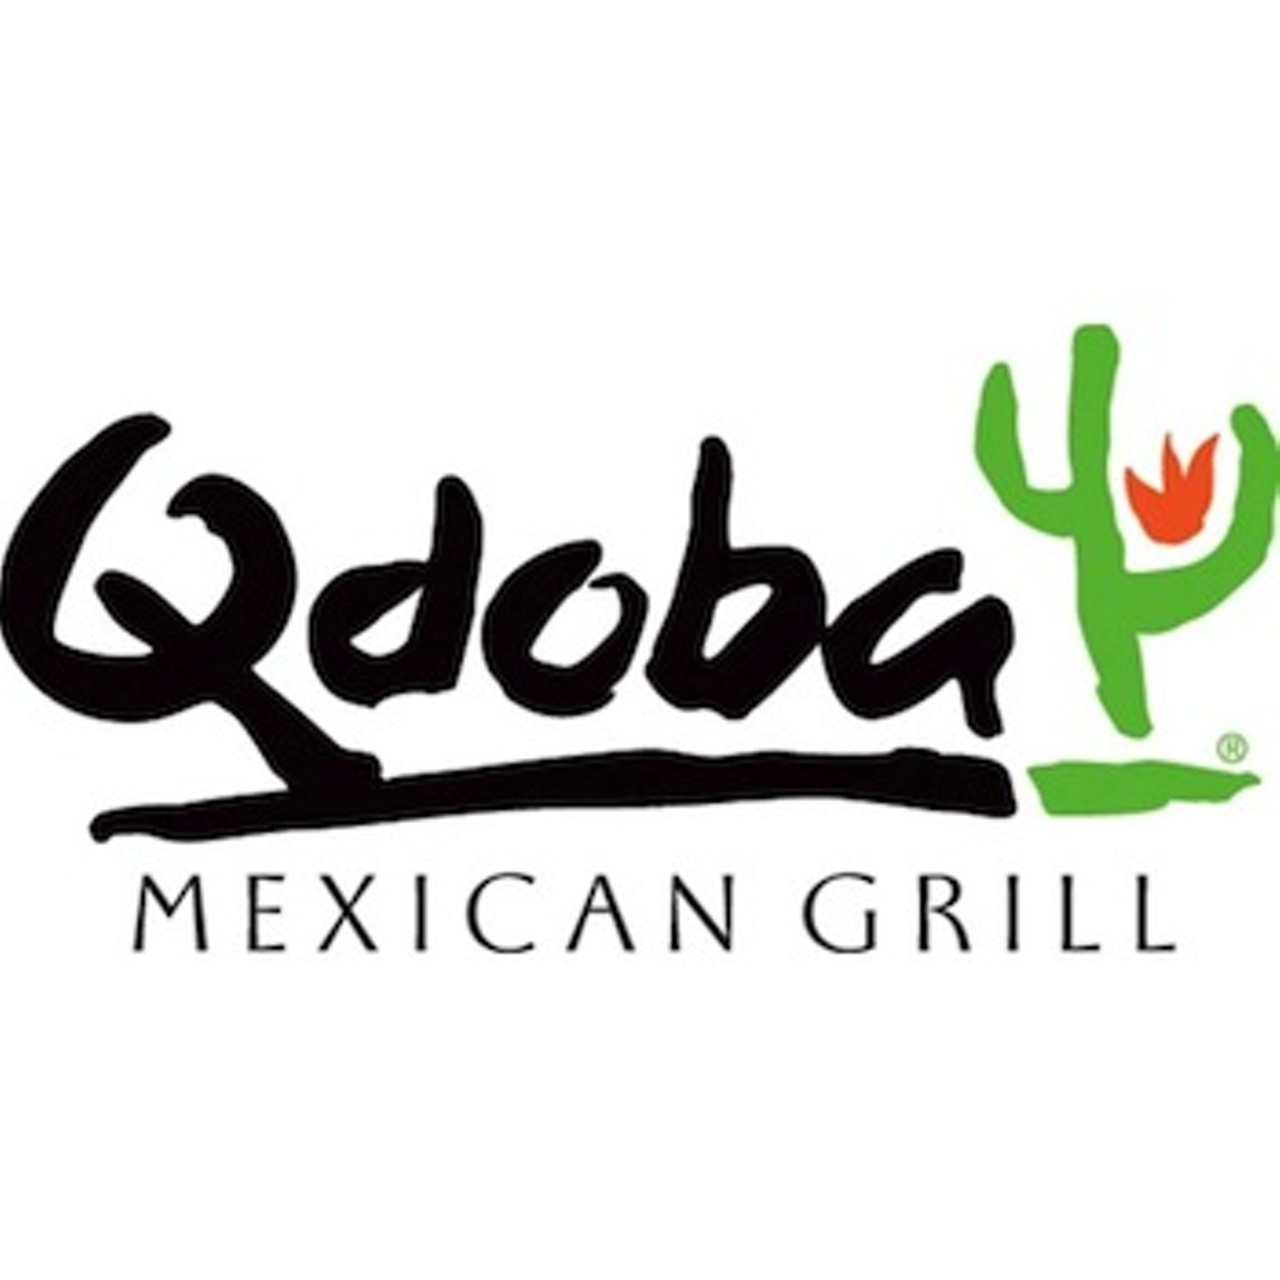 3. The Burrito That Proved a Burrito is Not a Sandwich: Qdoba is one of the largest Mexican food chains in the United States, earning its millions by selling burritos. It was also the subject of a lawsuit in Massachusetts after trying to open a spot in a Boston suburb. A sandwich shop in the same shopping plaza sued to stop the move, arguing a burrito was technically a sandwich. A judge threw out the suit, hereby setting a legal precedent than any pendejo knew: a burrito is not a sandwich.